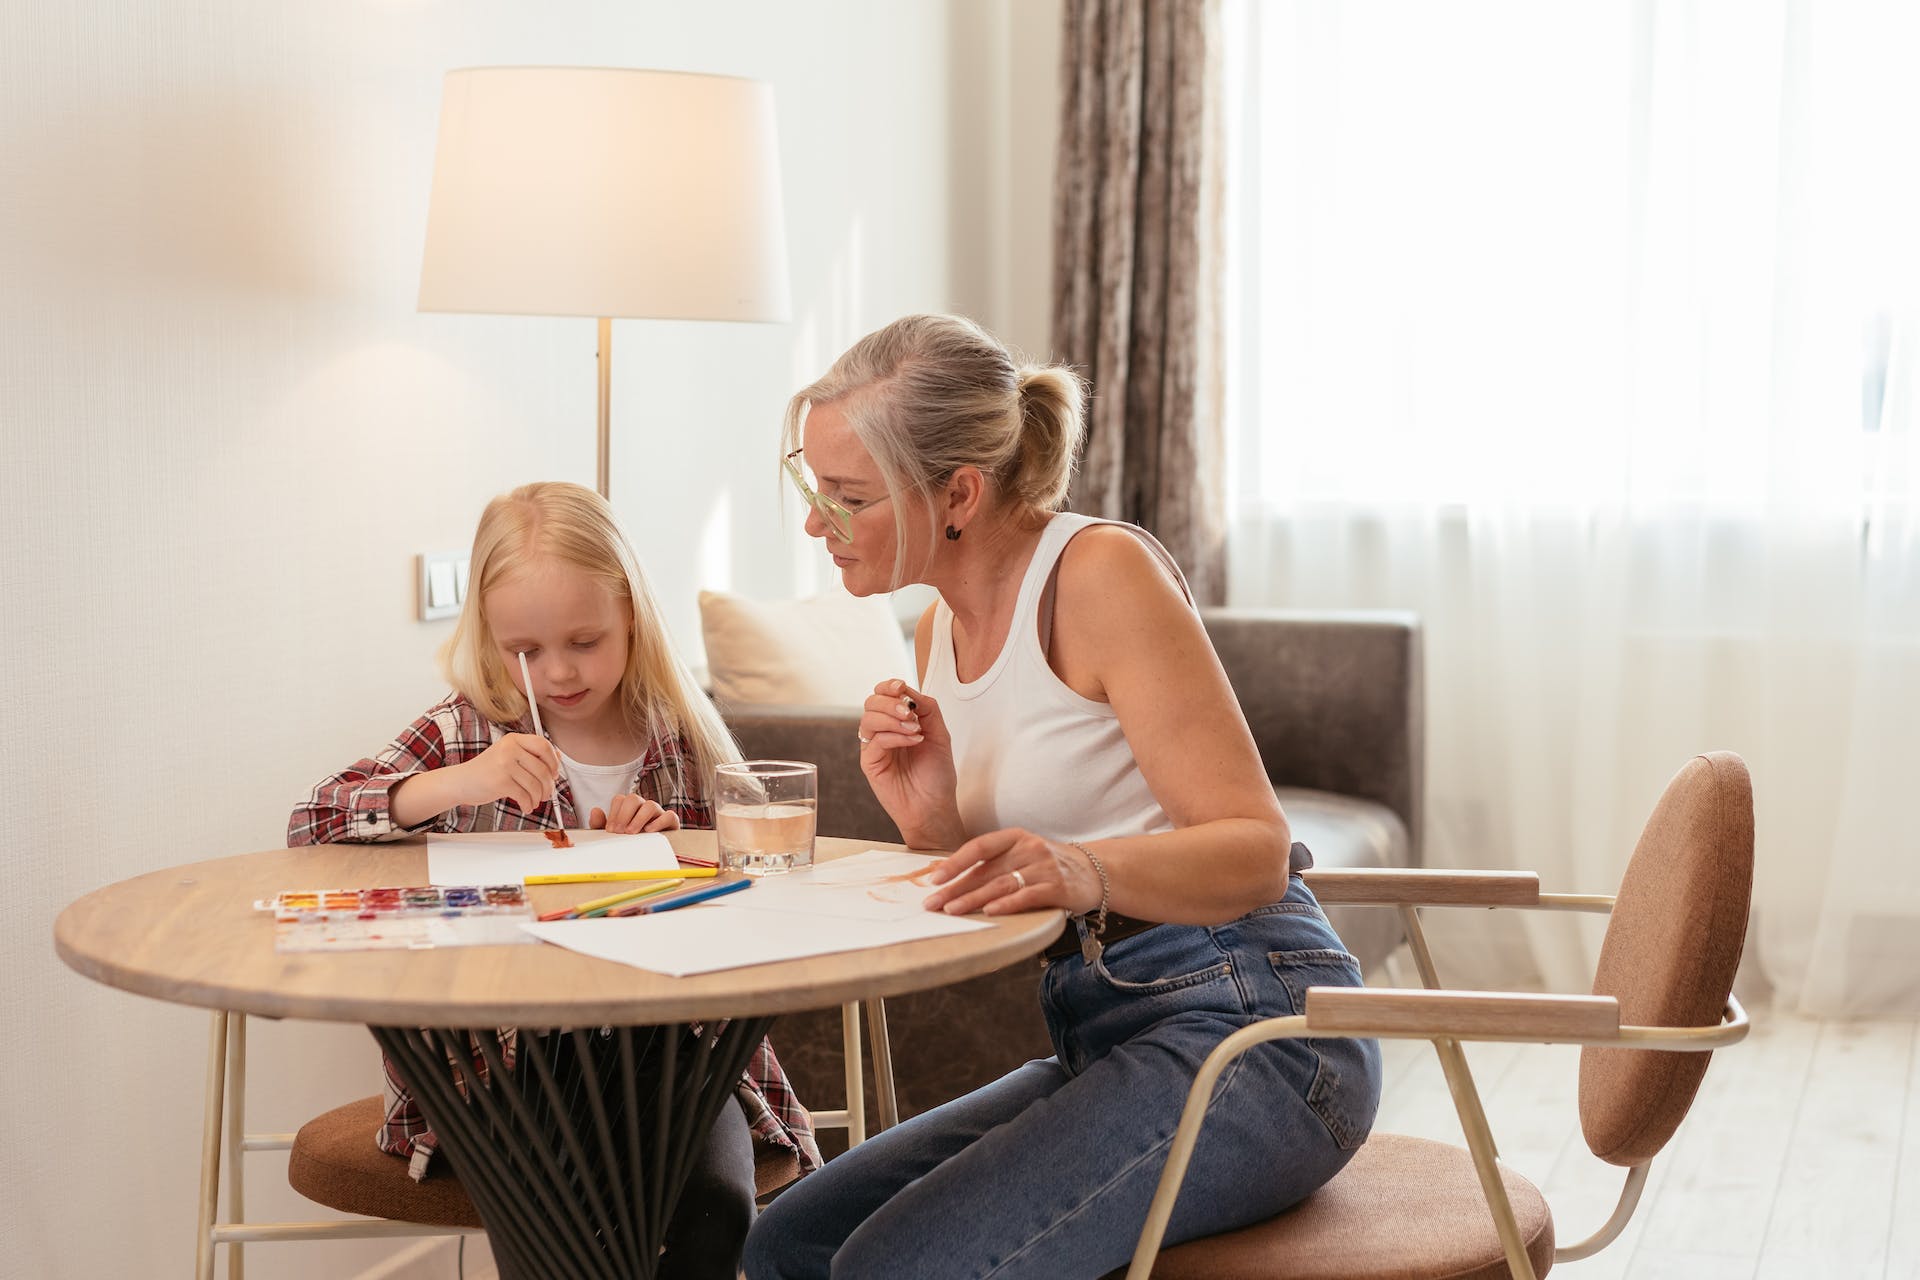 A young girl doing painting with her grandma | Source: Pexels